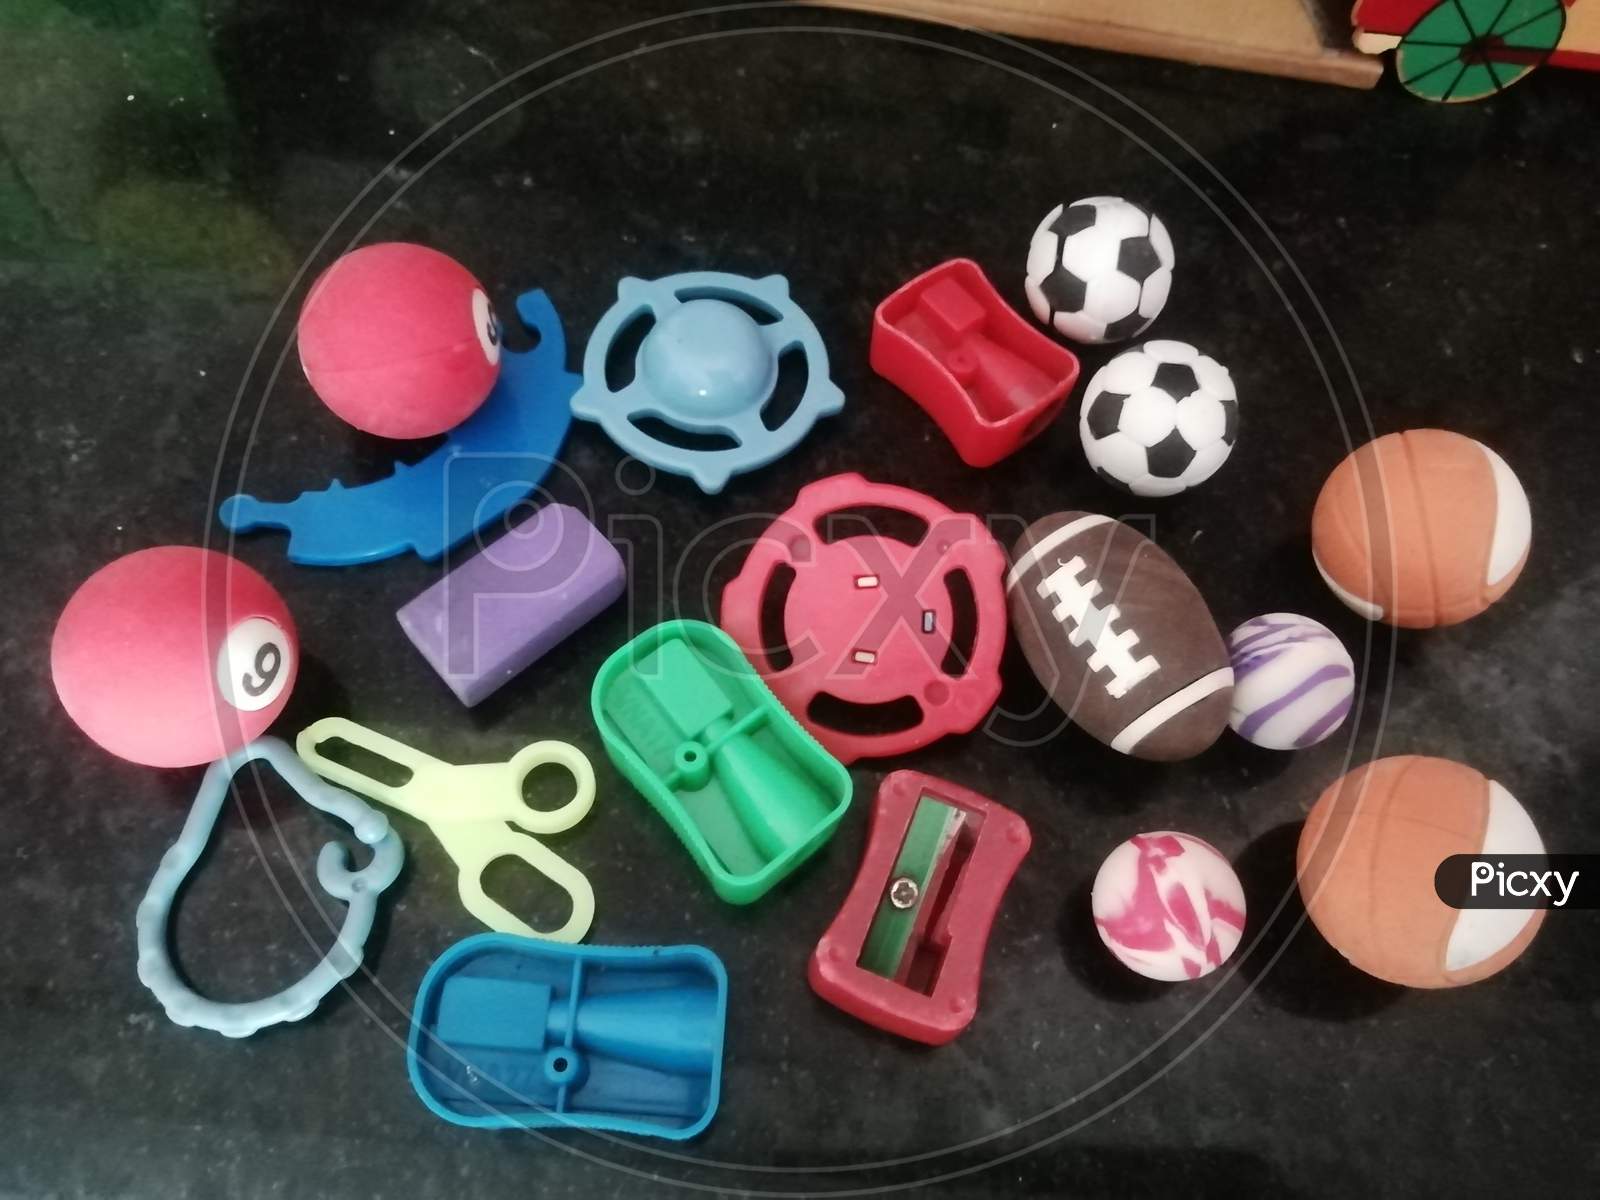 Children toys of different colors